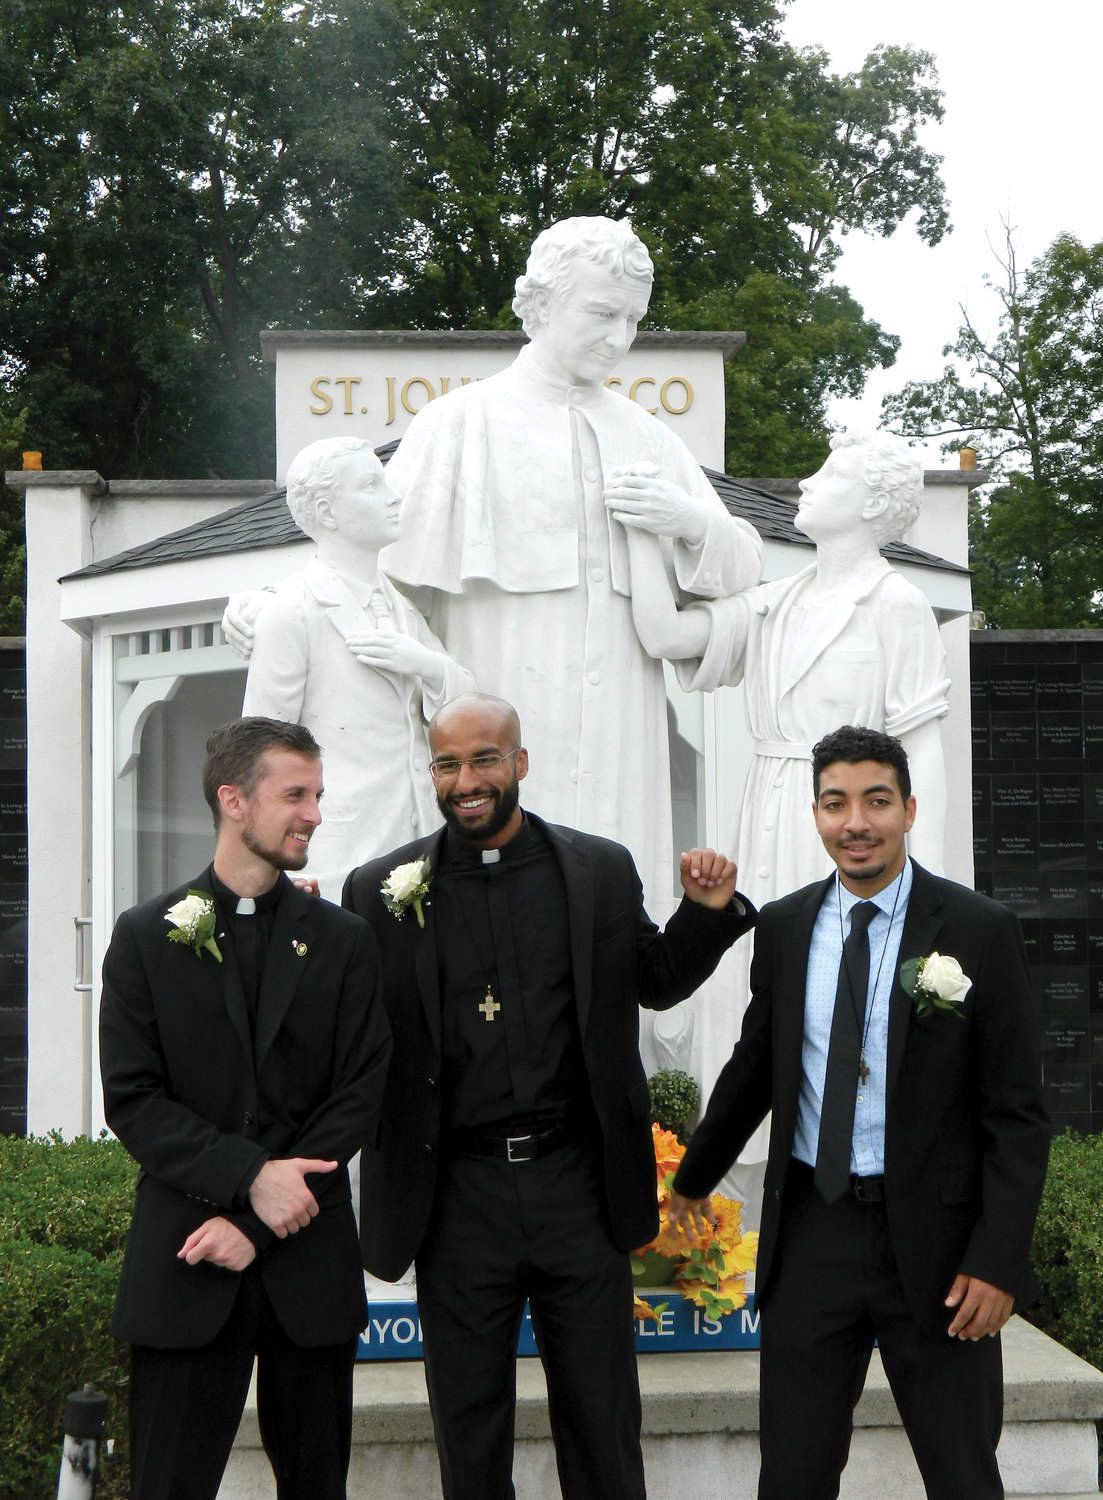 TAKING VOWS—After professing their final vows as Salesians of Don Bosco, Brother Joshua Sciullo, S.D.B., Brother Branden Gordon, S.D.B., and Brother Rafael Vargas, S.D.B., stand near a statue of St. John Bosco at the Marian Shrine in Stony Point.